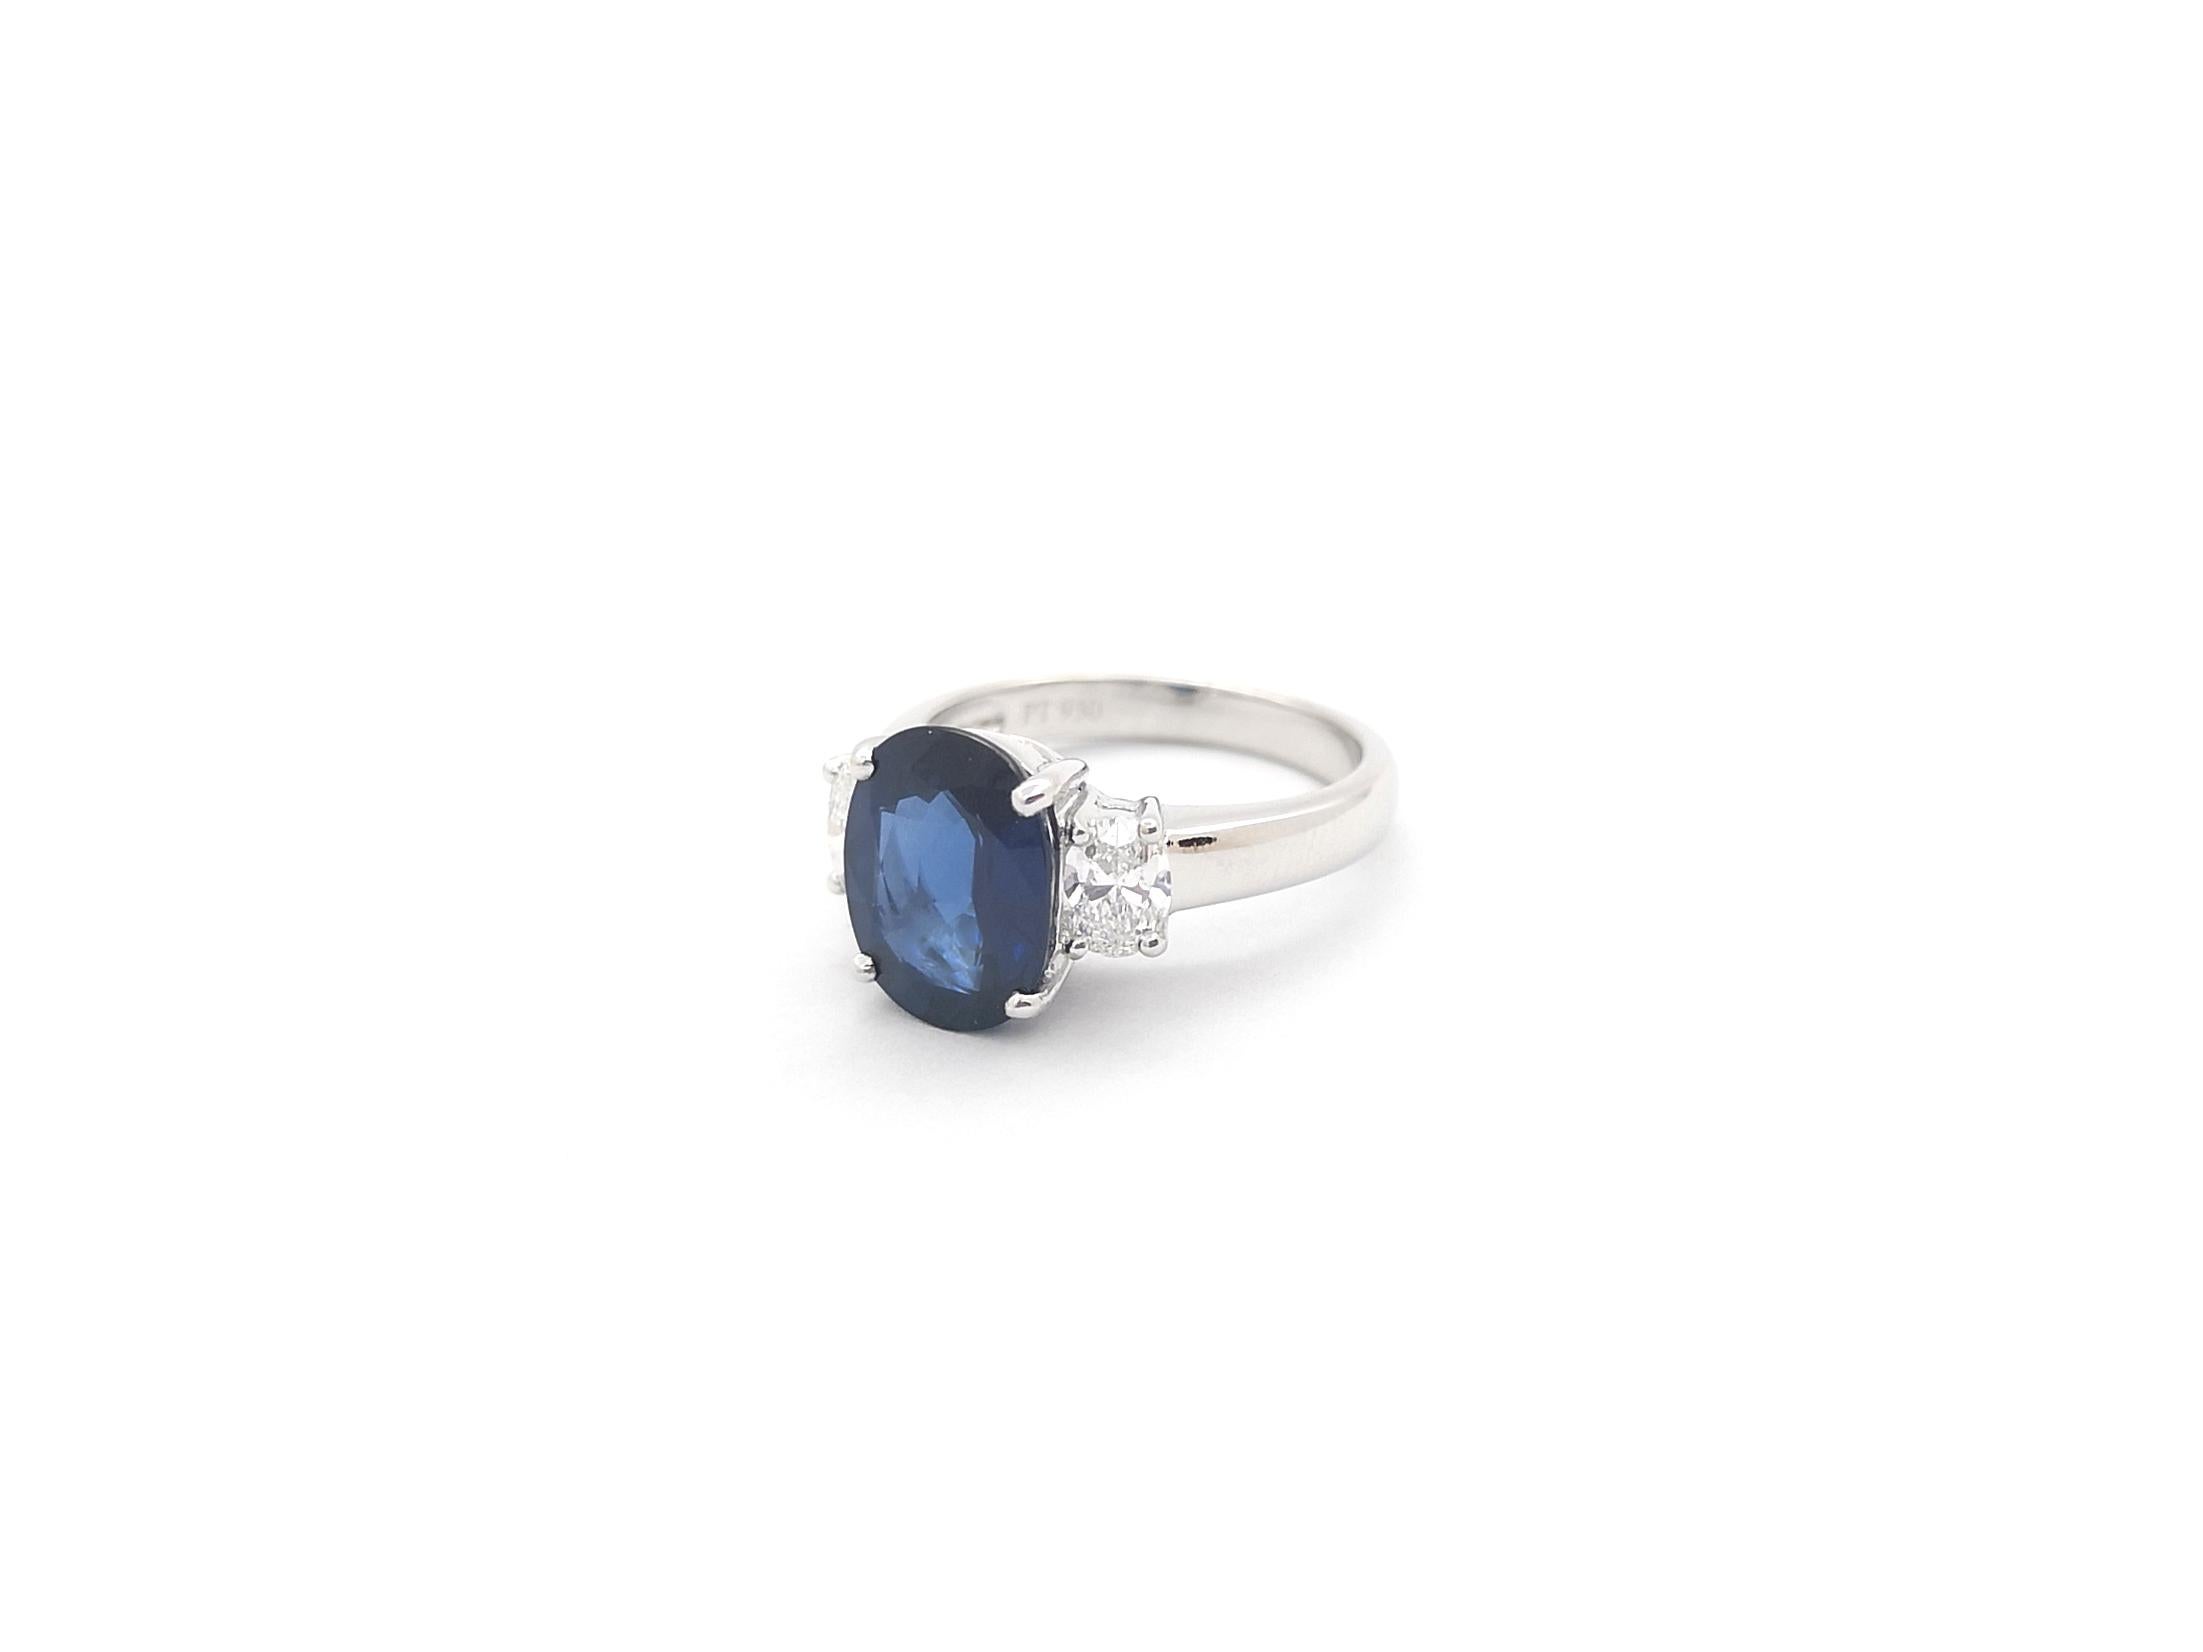 GIA Certified 3.89 cts Blue Sapphire with Diamond Ring set in Platinum 950  For Sale 4